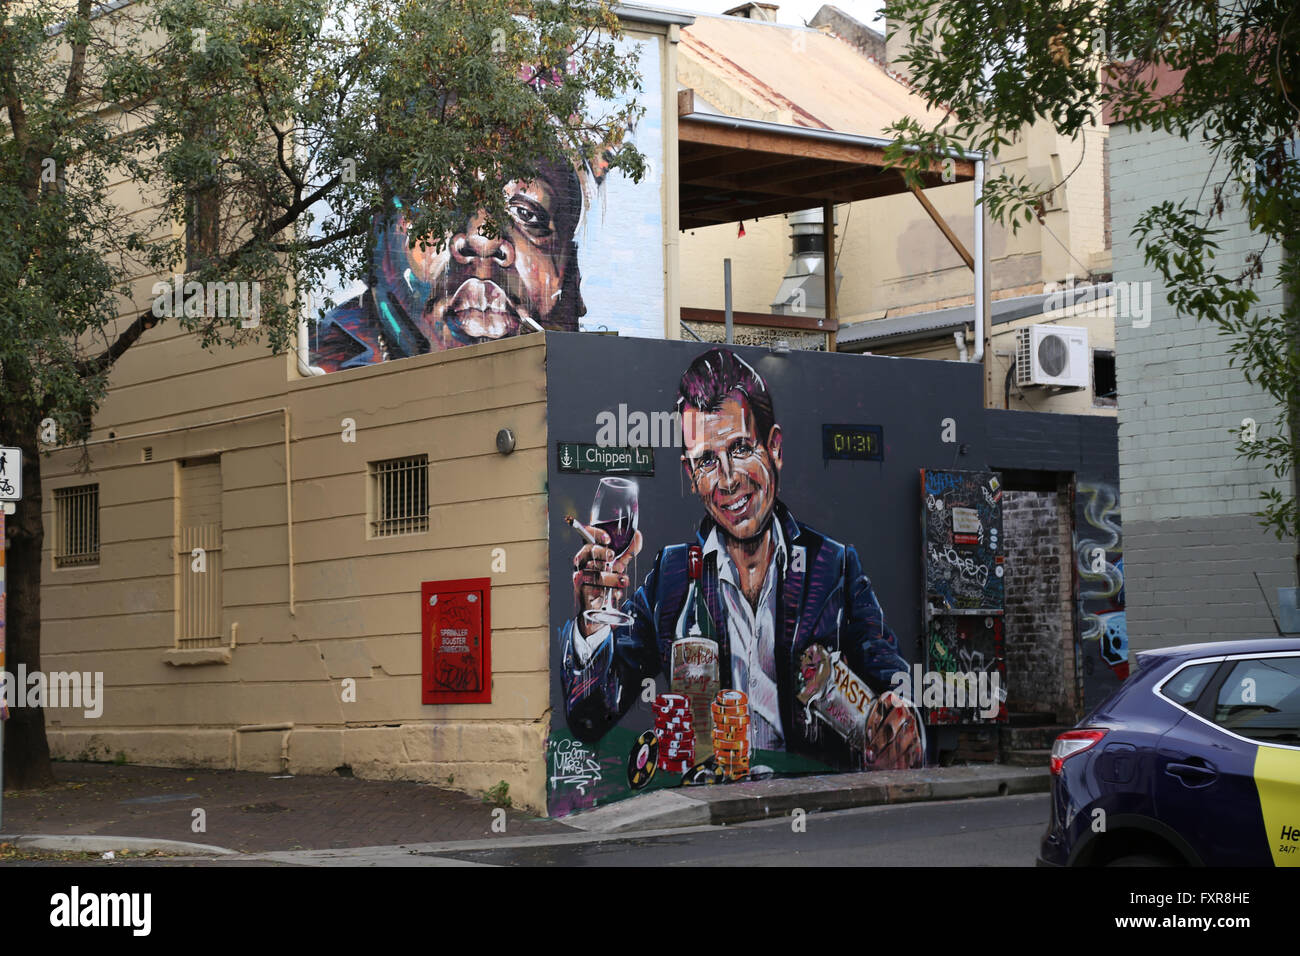 Sydney, Australia. 18 April 2016. Artist Scott Marsh, renowned for his Kanye Loves Kanye mural has made another mural, this time of NSW Premier, Mike Baird in a statement about Sydney's lockout laws. The Premier is depicted holding a kebab and glass of wine surrounded by poker chips. The mural can be seen on Chippen Lane in Chippendale, Sydney, just a short walk from the previous mural on Teggs Lane, which has now been painted over. Credit: Richard Milnes/Alamy Live News Stock Photo